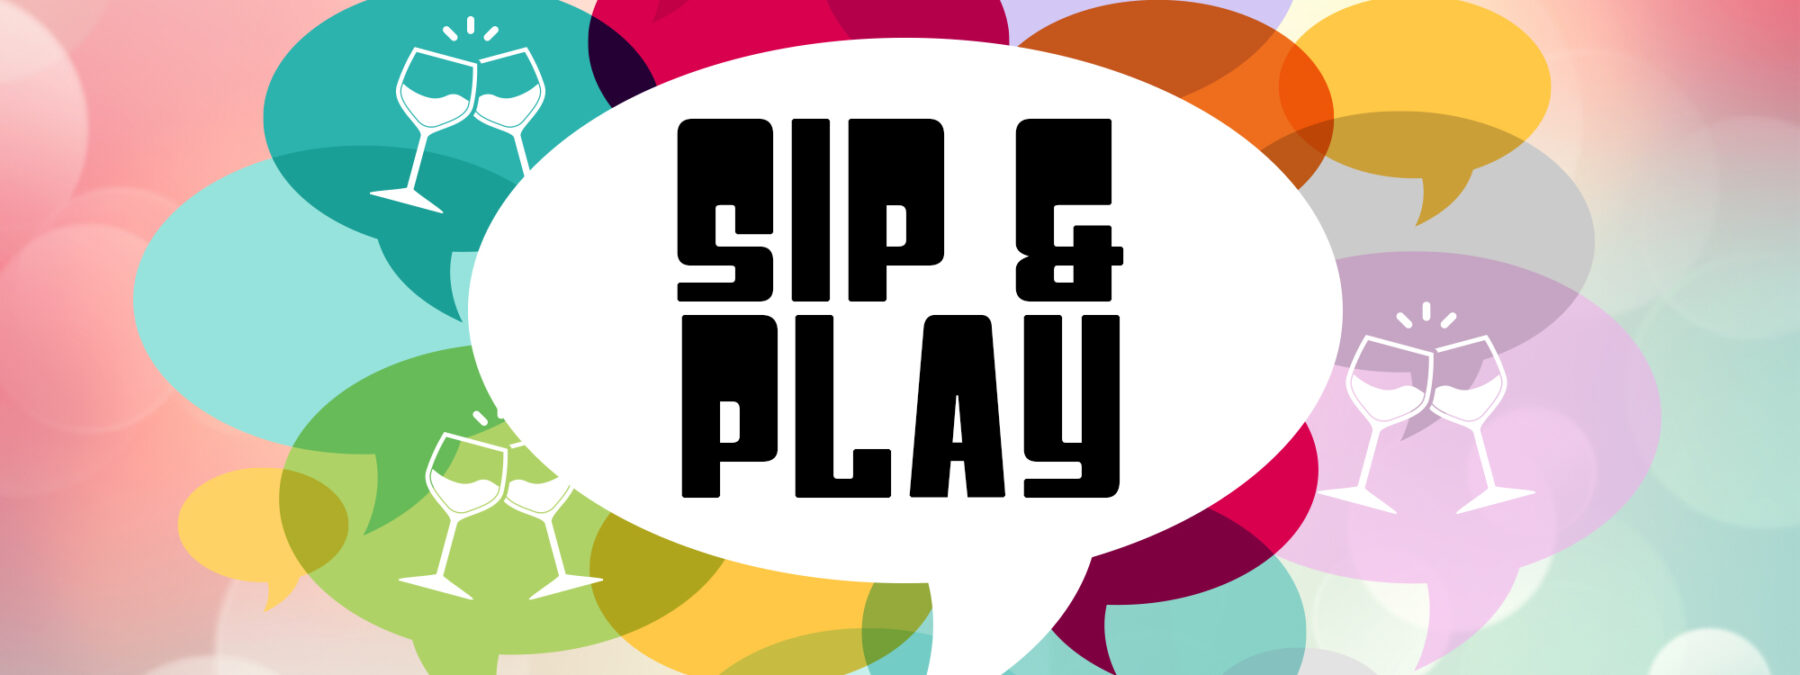 Sip & Play speech bubble over colorful background of speech bubbles and clinking wine glasses